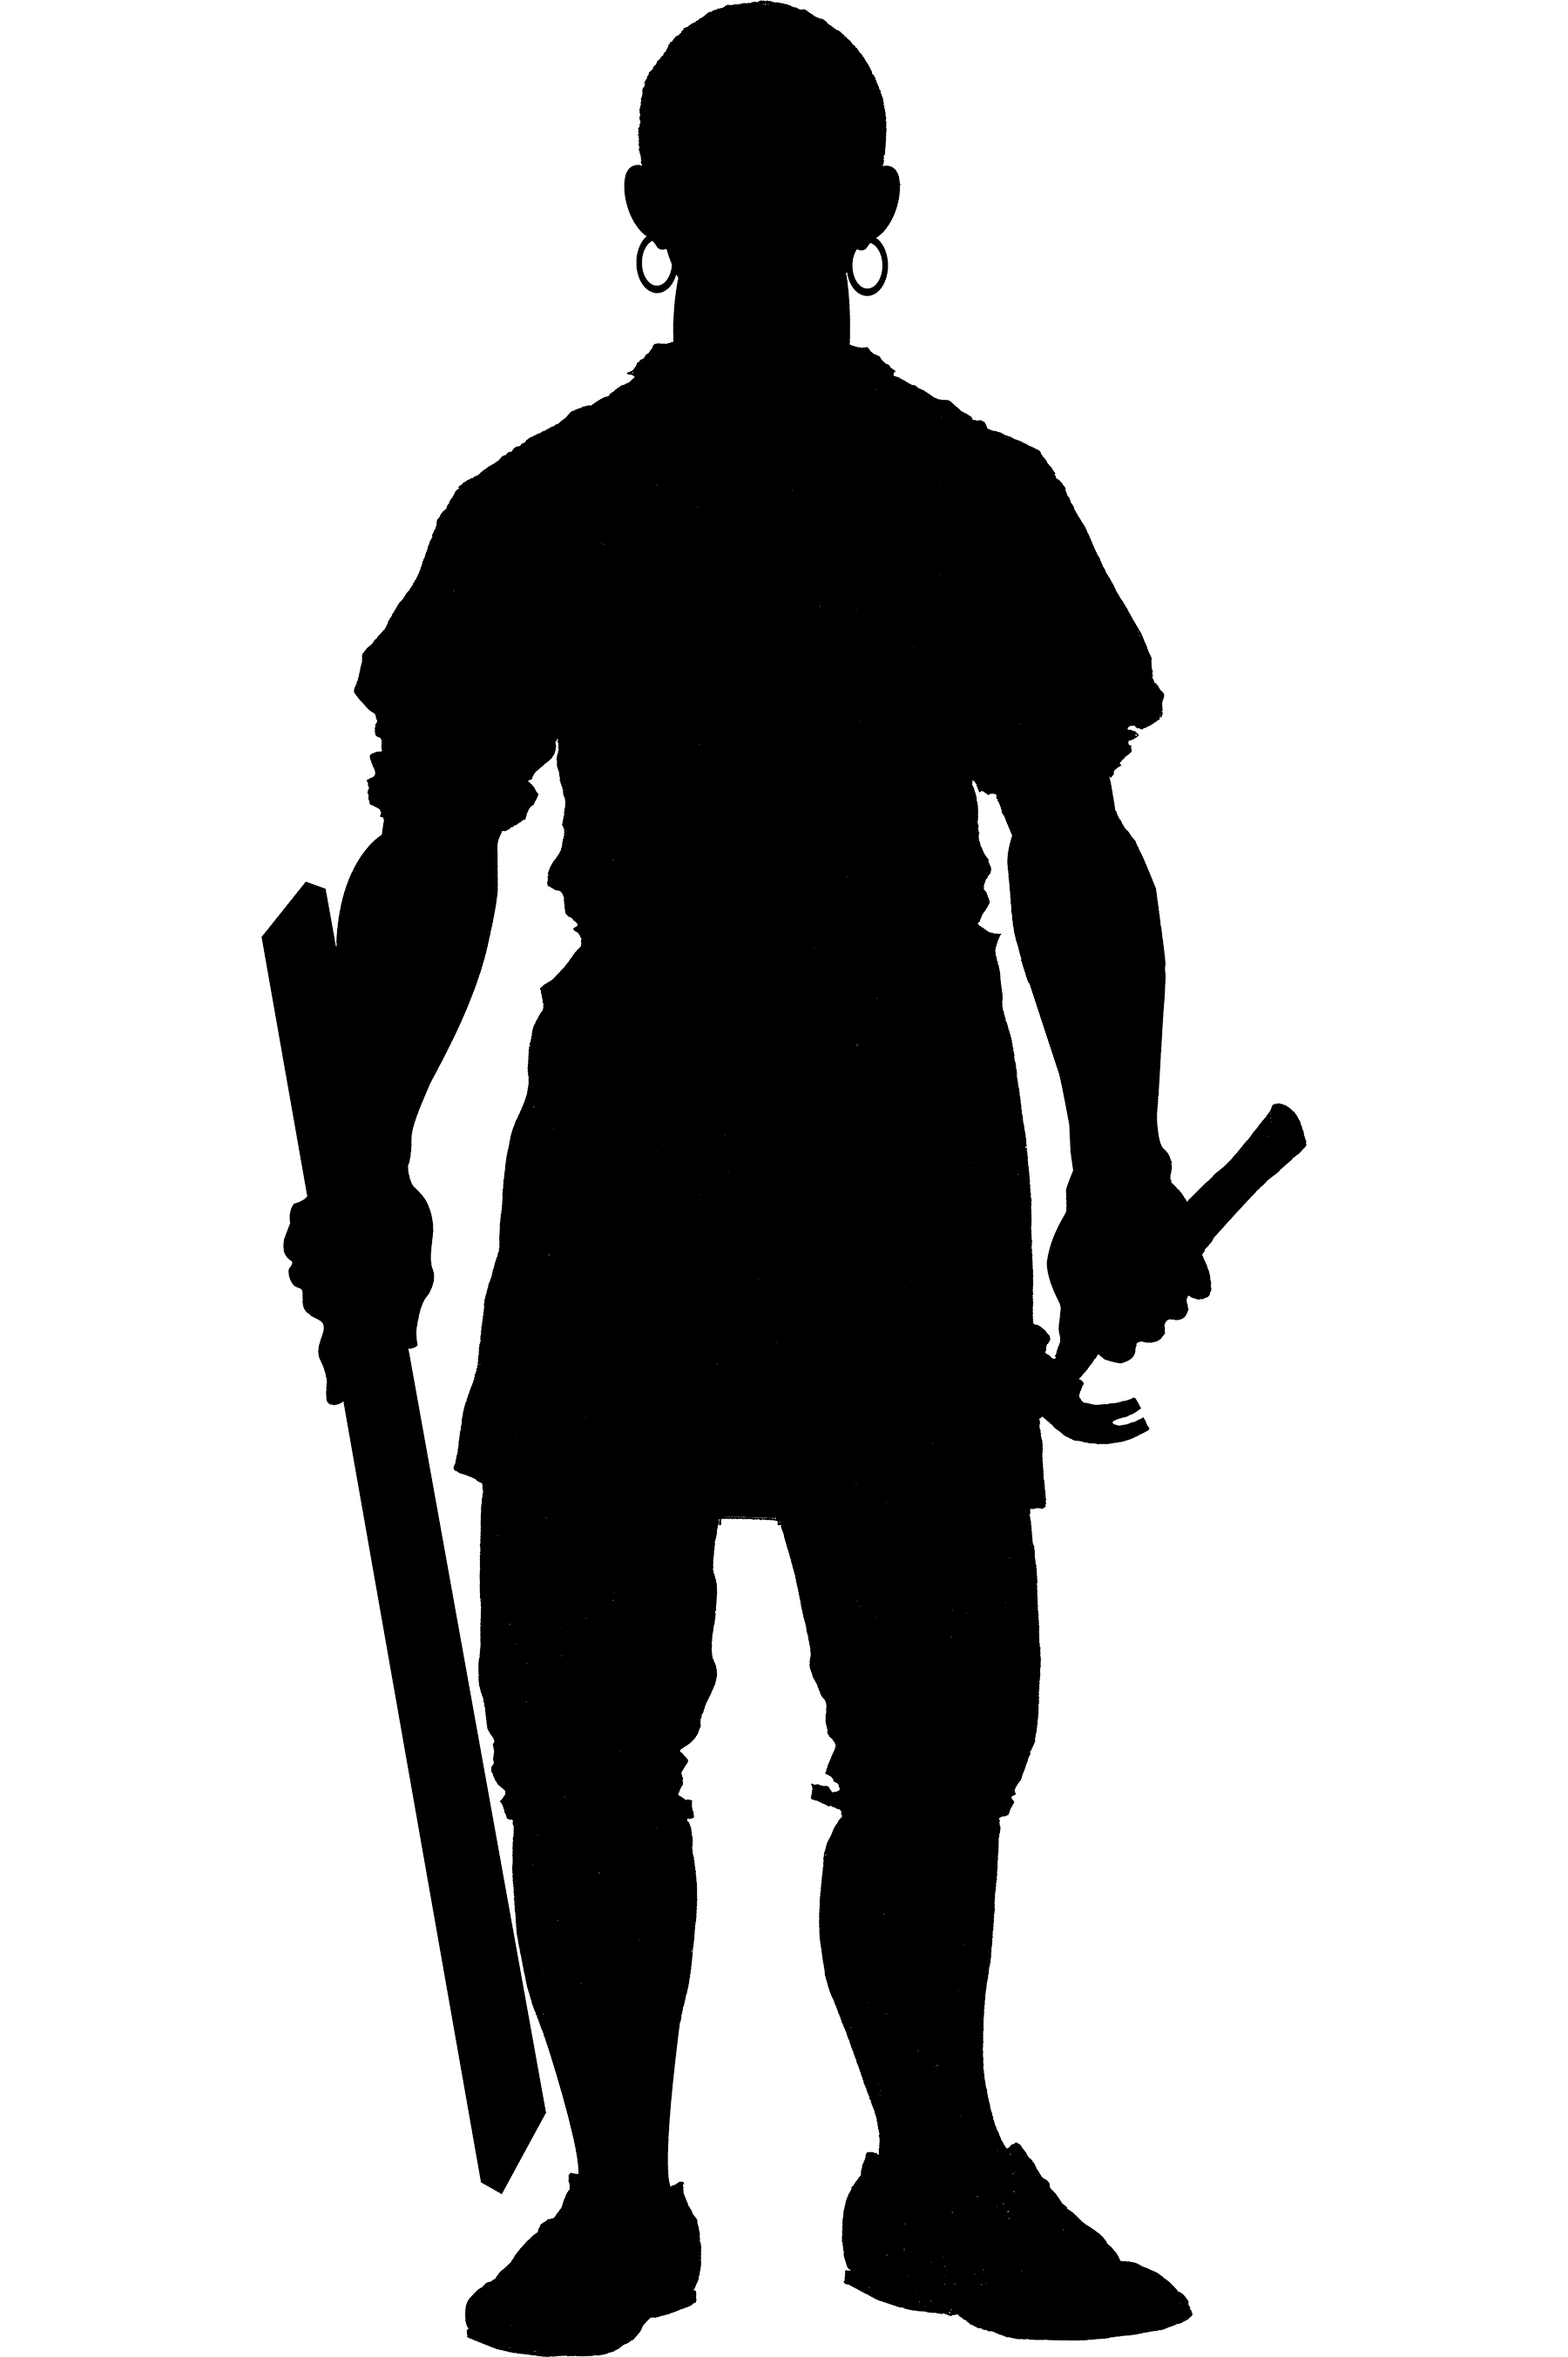 Plumber clipart silhouette. People standing png cool